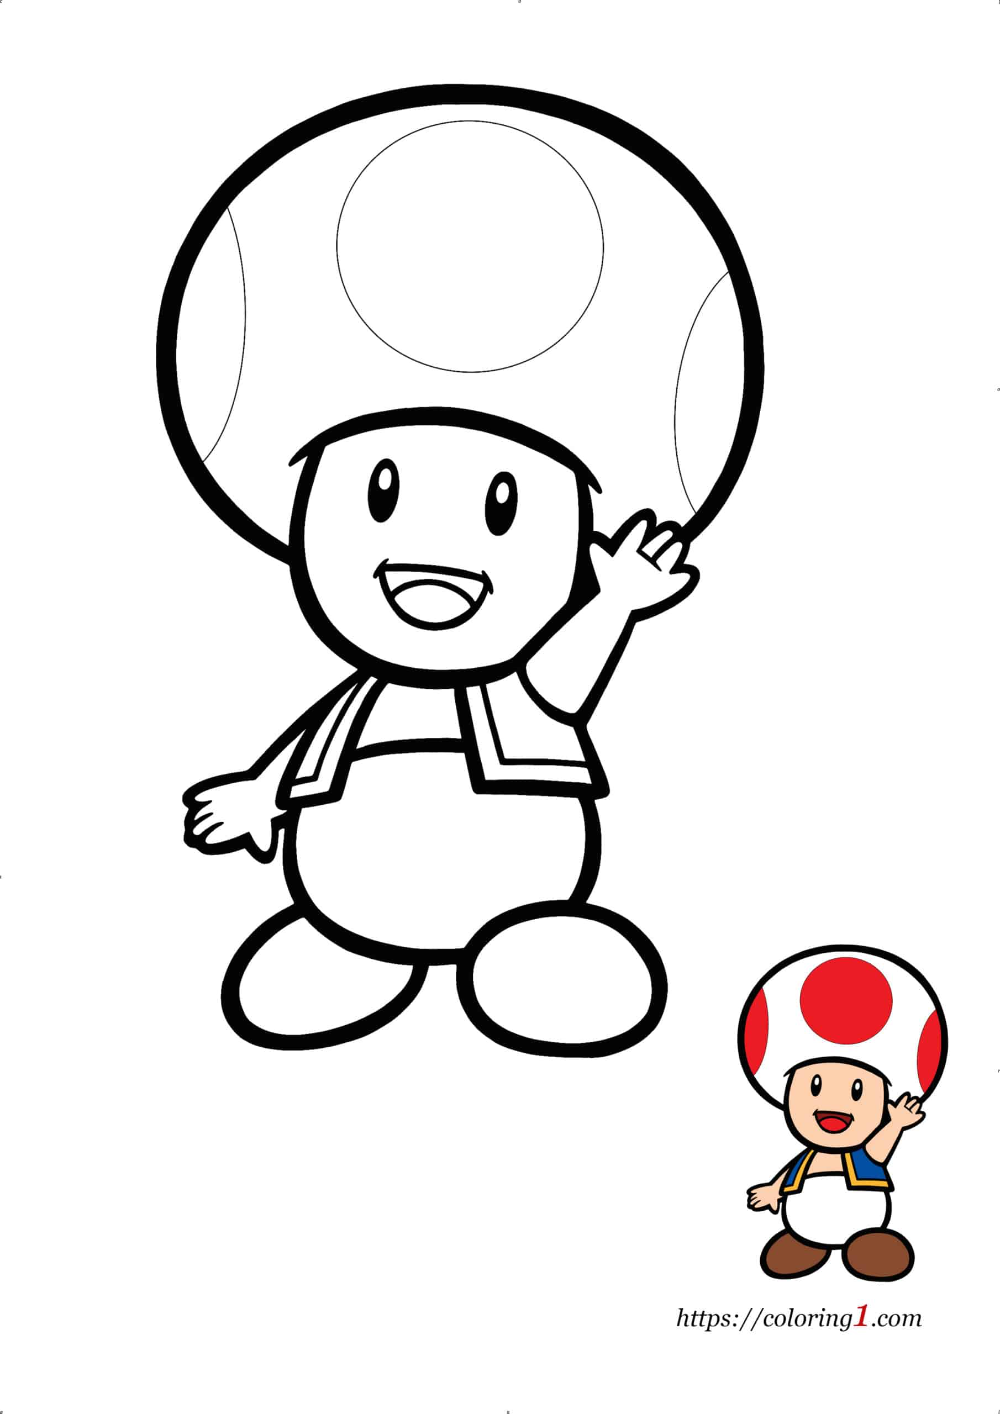 Toad Mario Coloring Pages - 2 Free Coloring Sheets (2021) | Mario coloring  pages, Super mario coloring pages, Coloring pages